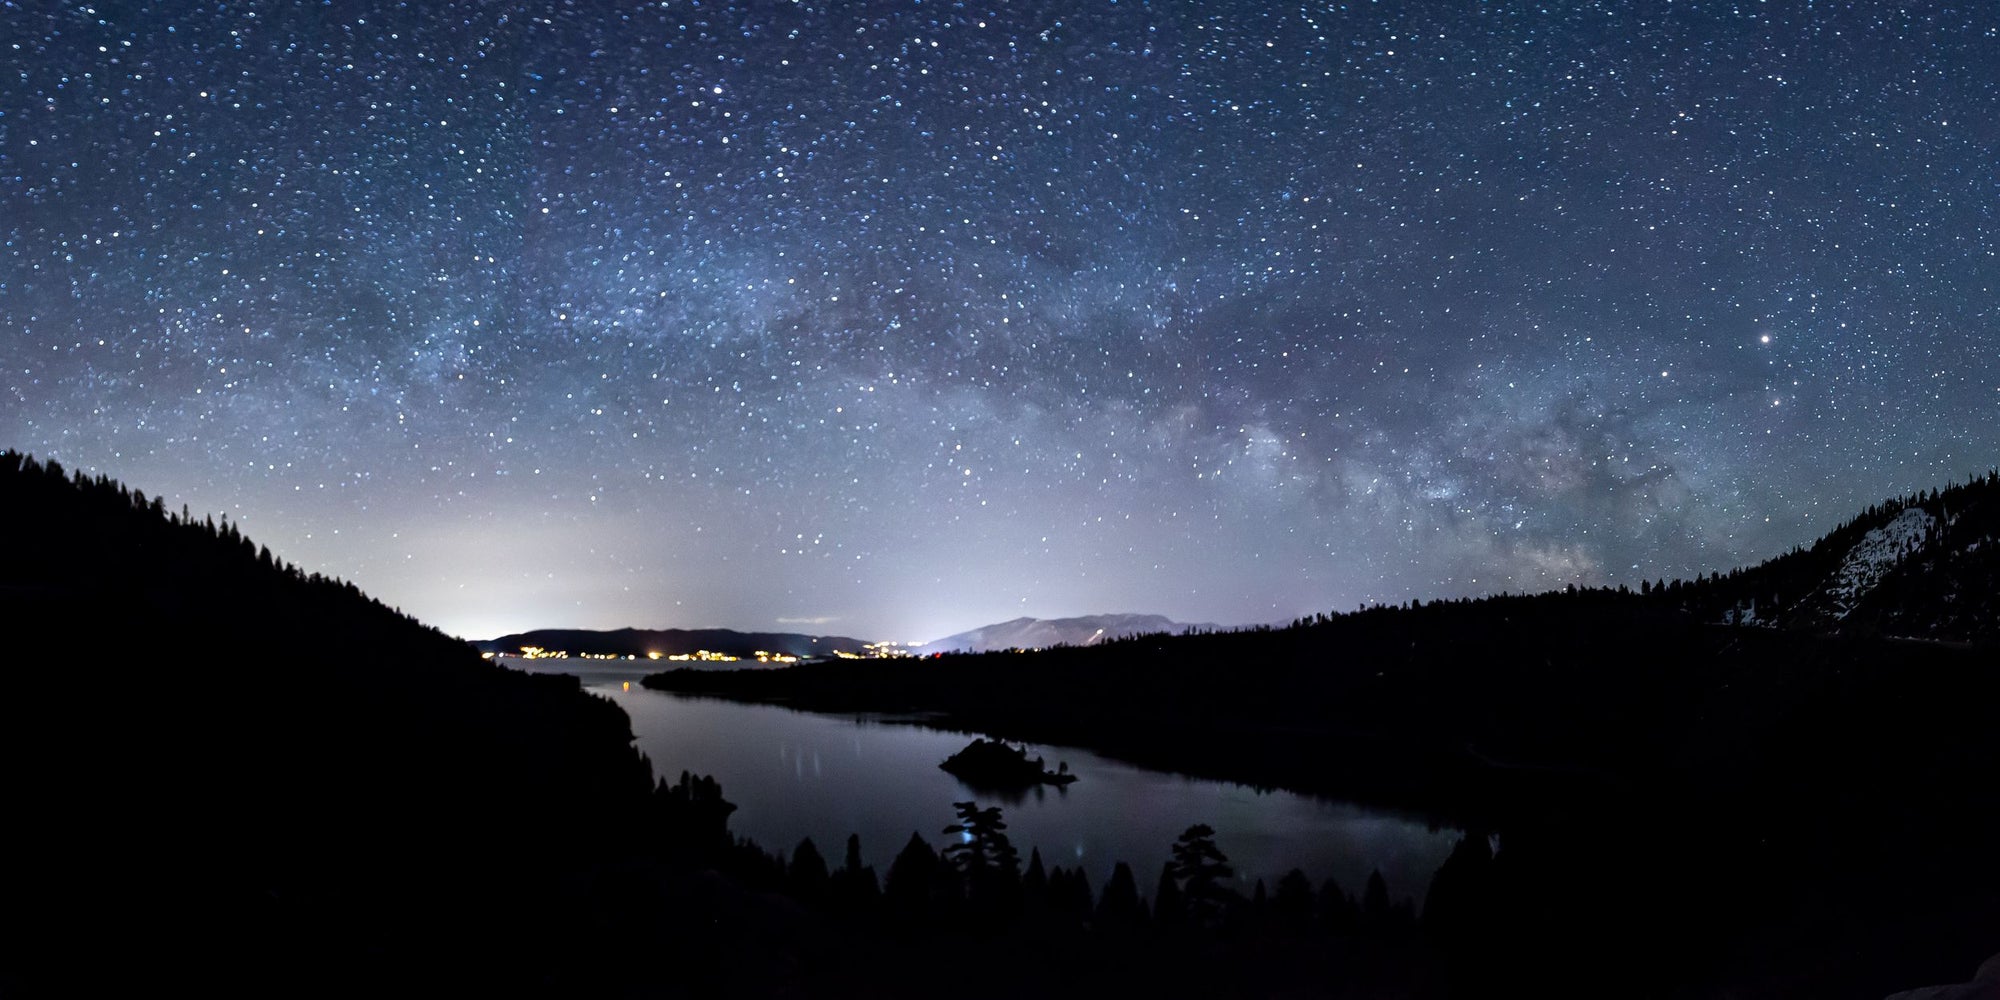 The Milky Way arches high above Lake Tahoe's Emerald Bay.